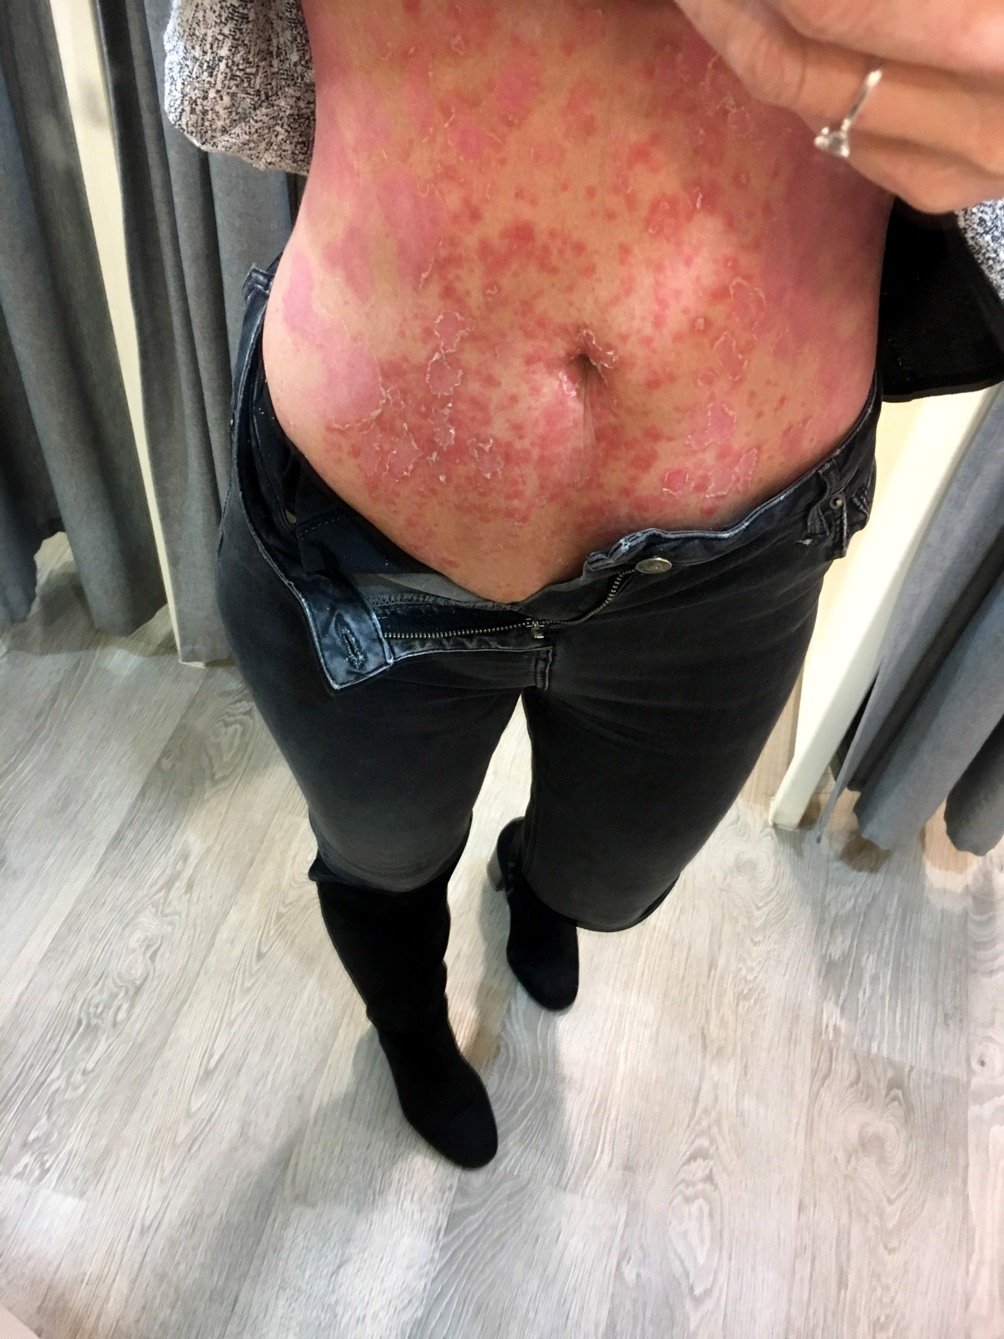 Woman plagued by agonising psoriasis for 35 years cures ...